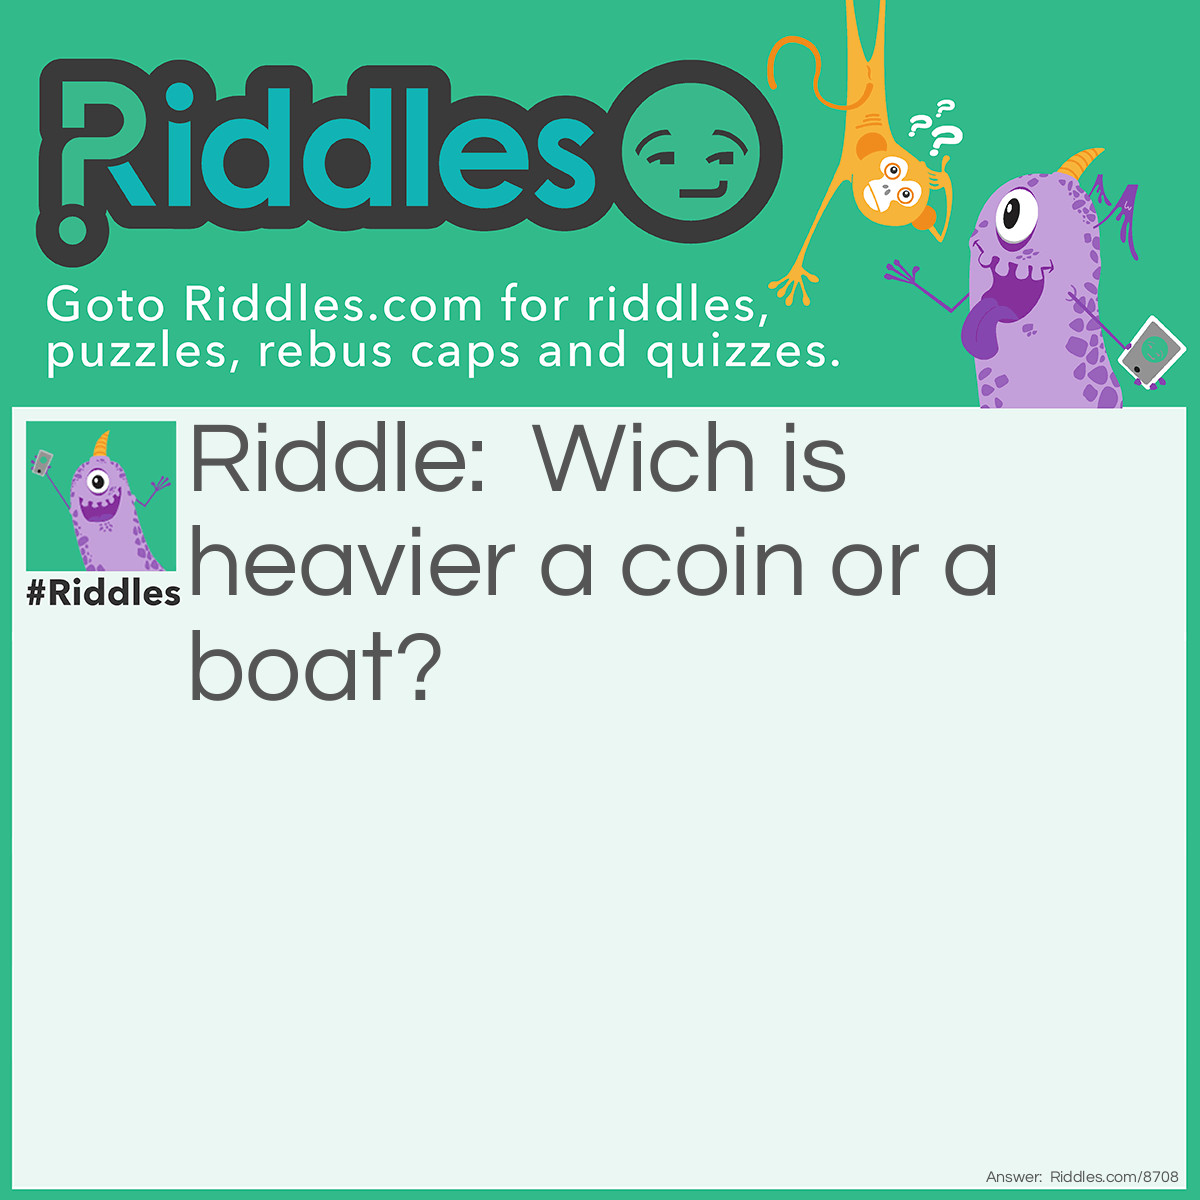 Riddle: Wich is heavier a coin or a boat? Answer: A coin is heavier a coin submerged and a boat floats